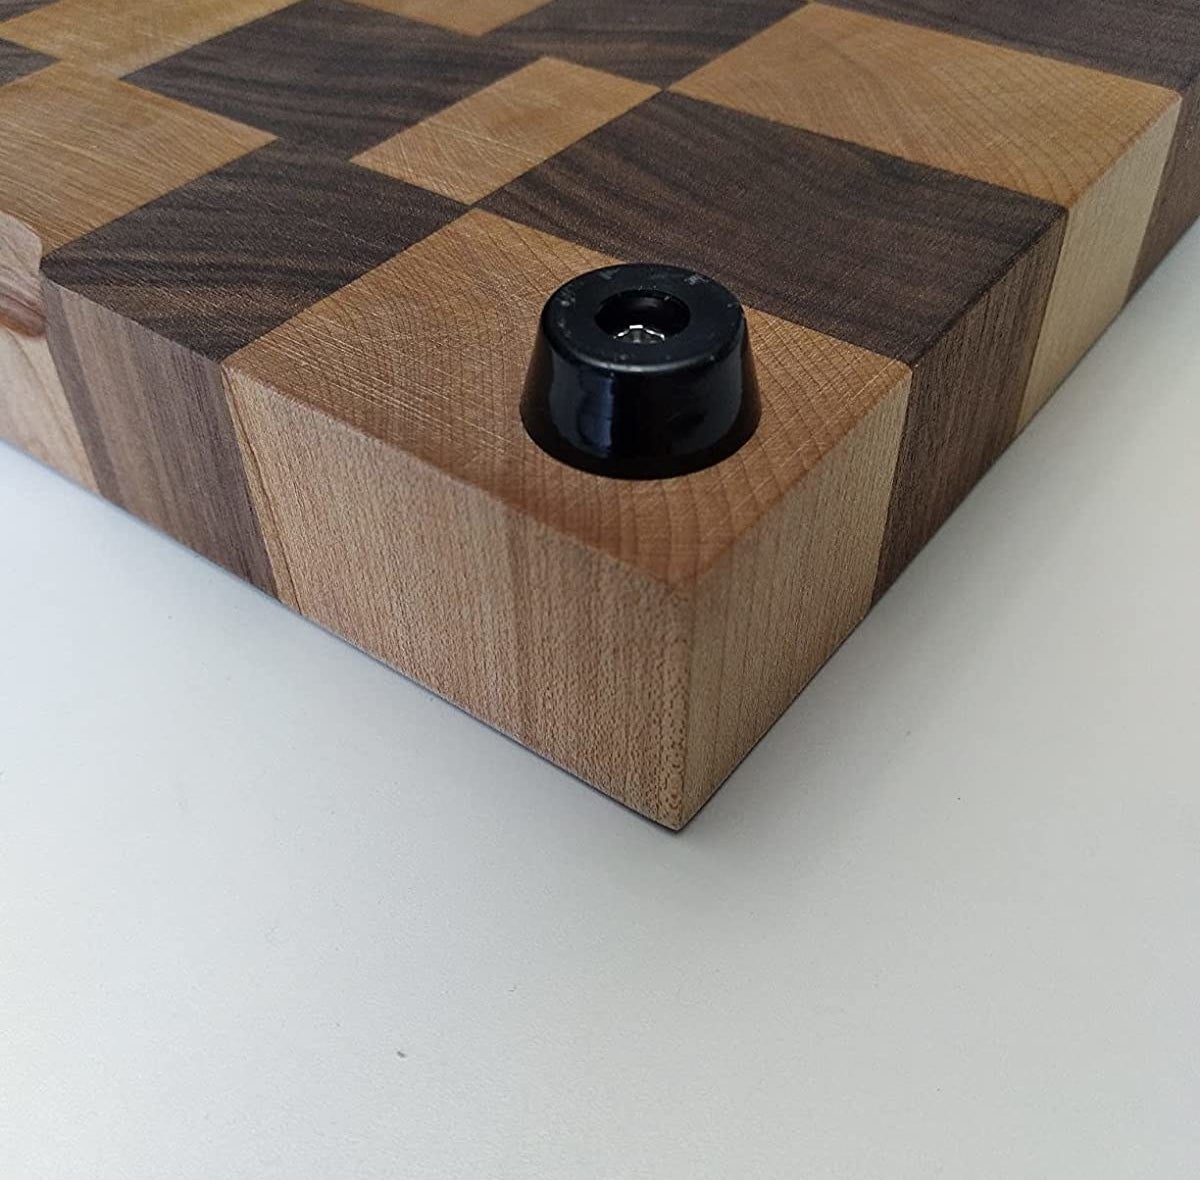 Reviewer image of the rubber feet on a wood cutting board